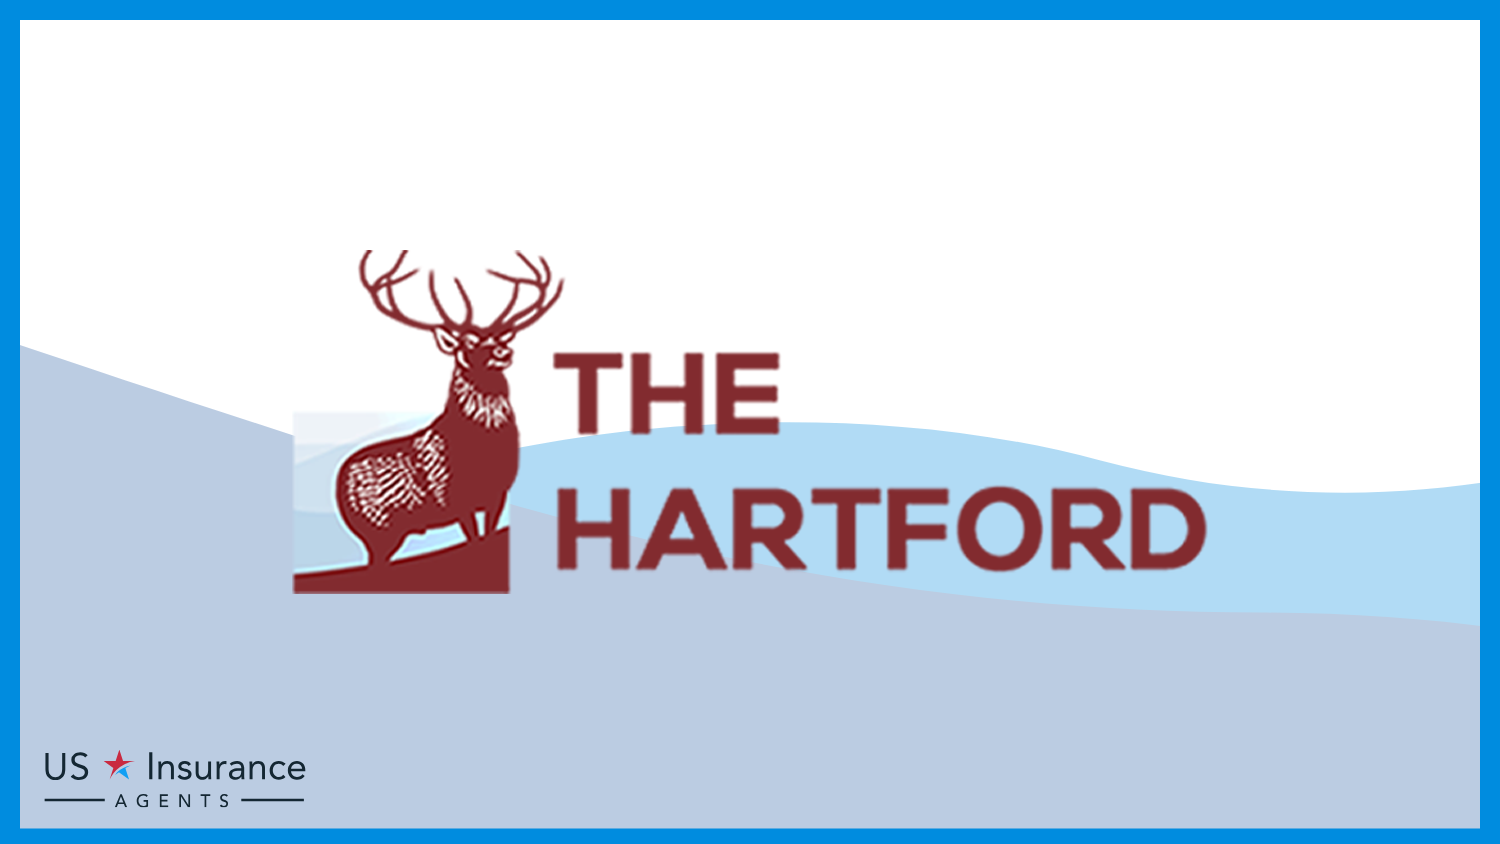 The Hartford: Best Business Insurance for Auto Repair Shops